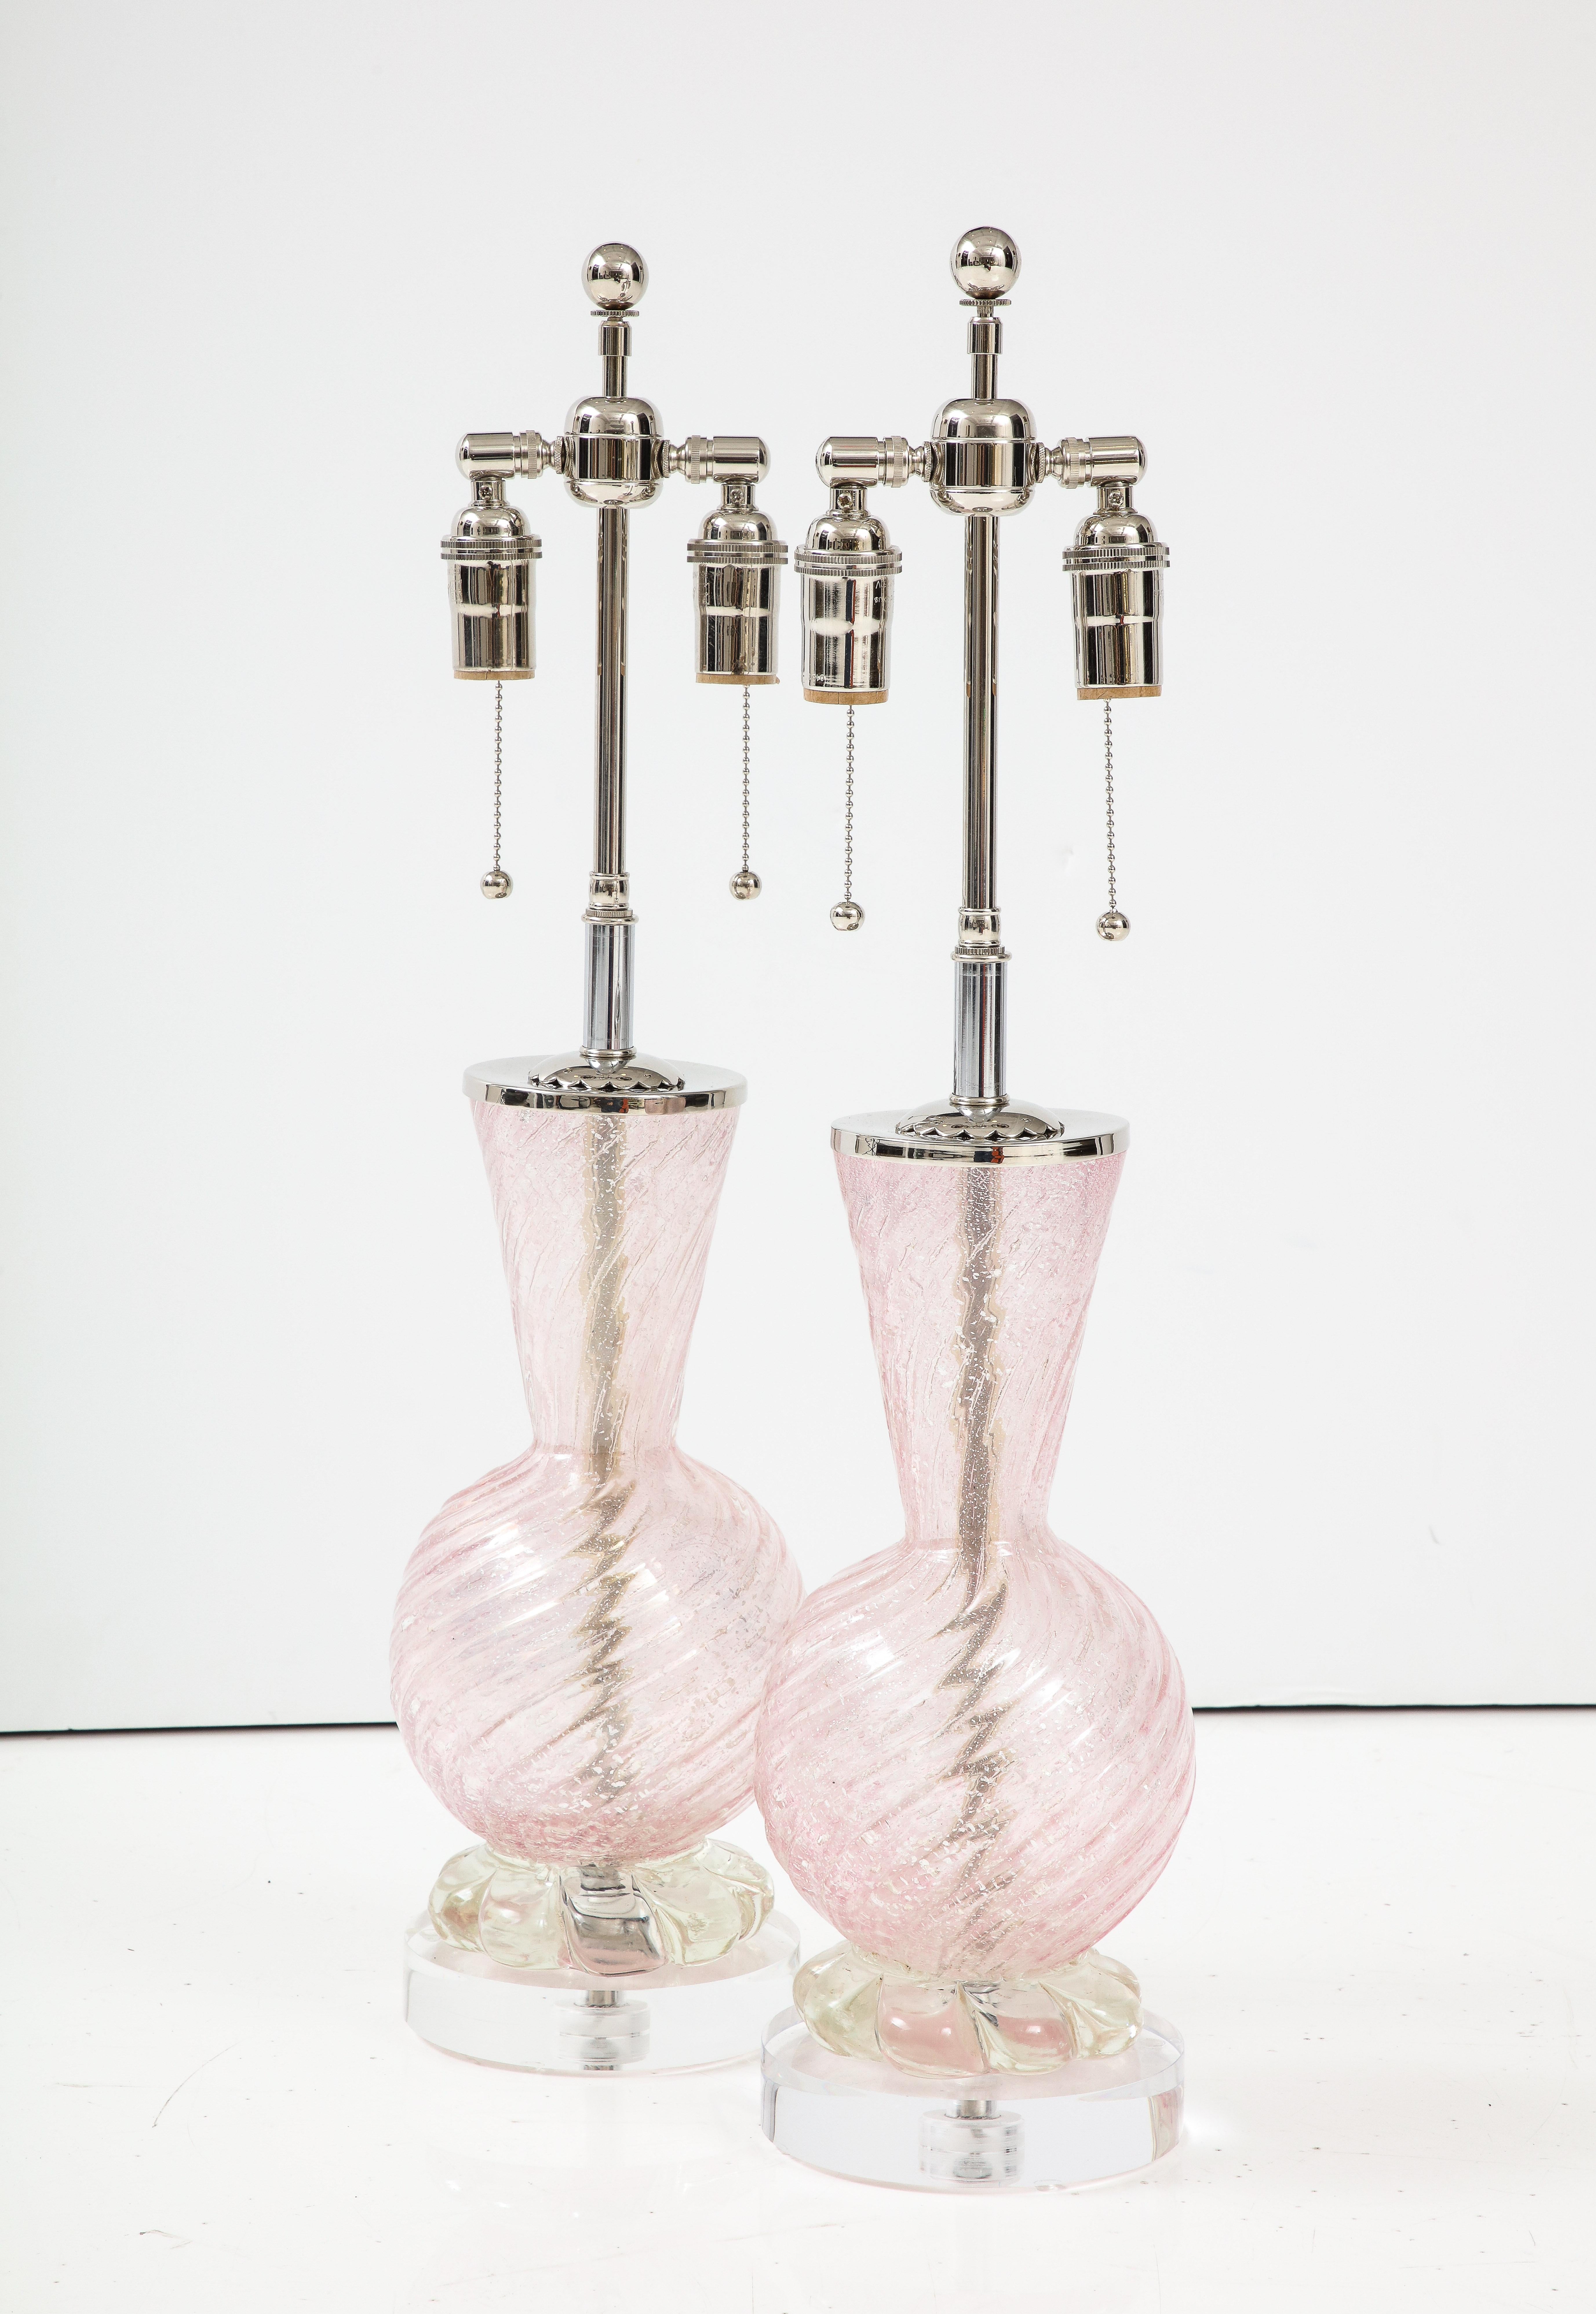 Pair of Pale Pink Murano glass lamps with Silver dust inclusions.
The lamps sit on thick lucite bases and have been Newly rewired with adjustable
polished Nickel double clusters that take standard size light bulbs.
The height to the top of the glass